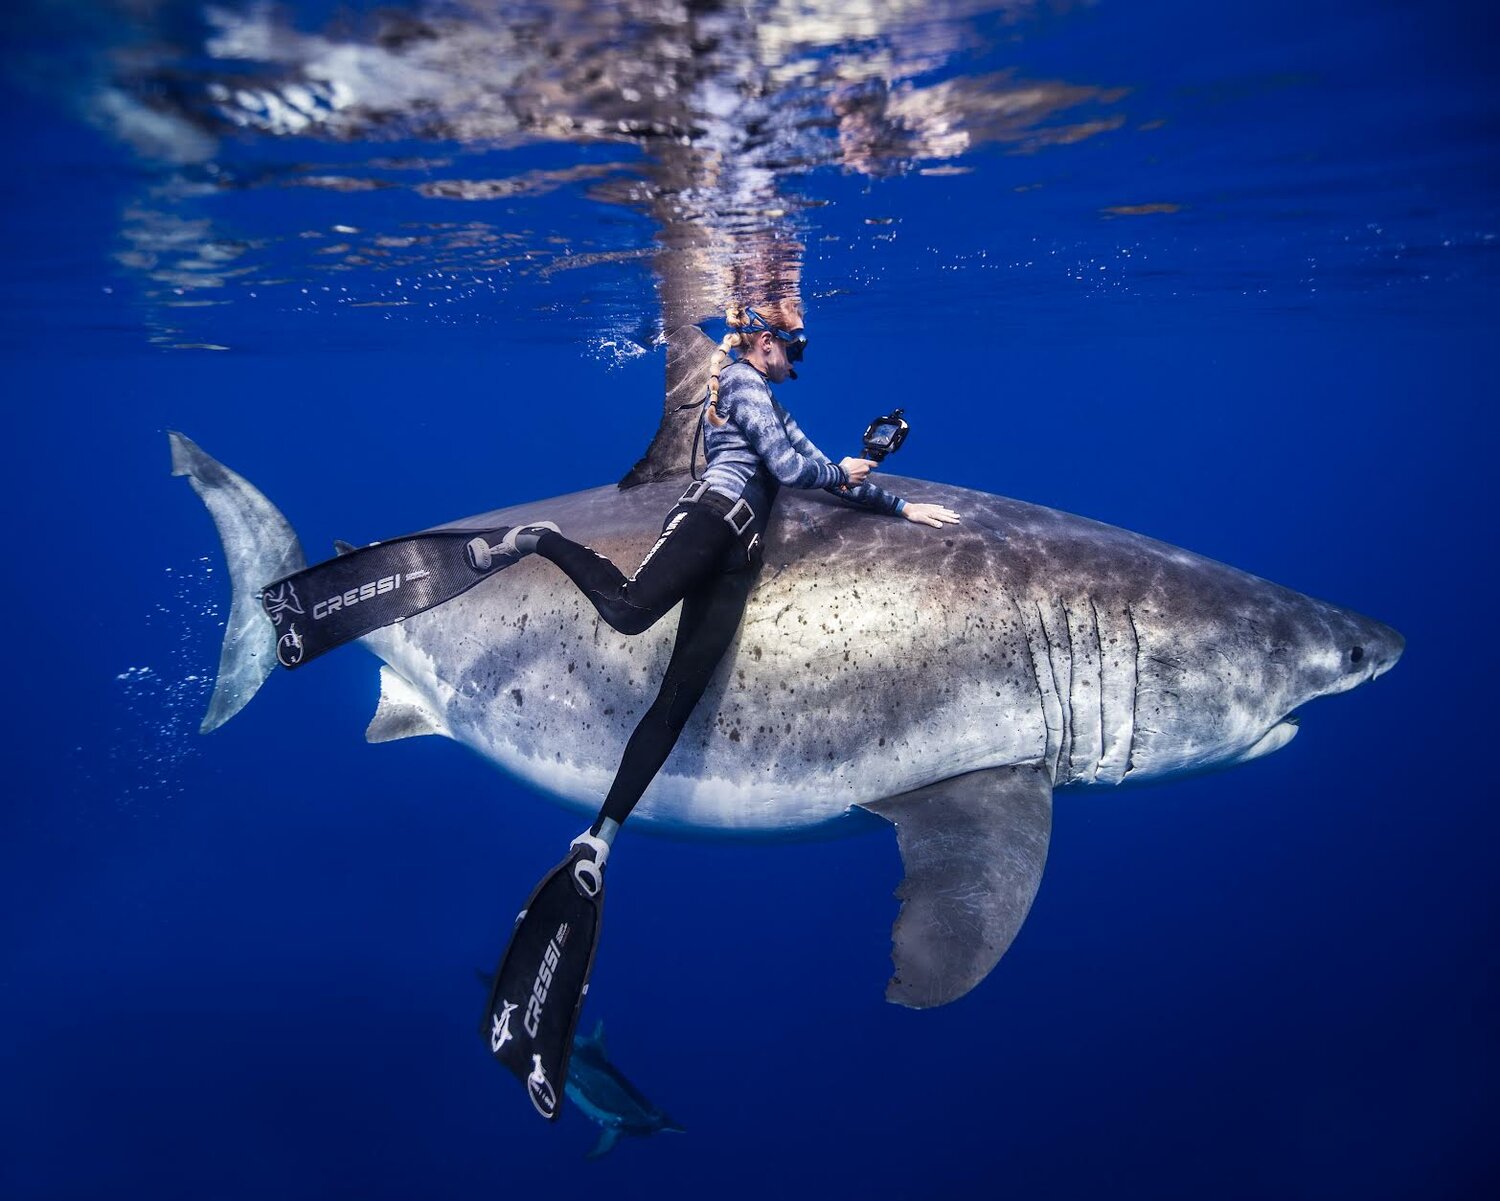 Kayleigh Grant diving with the great white shark.